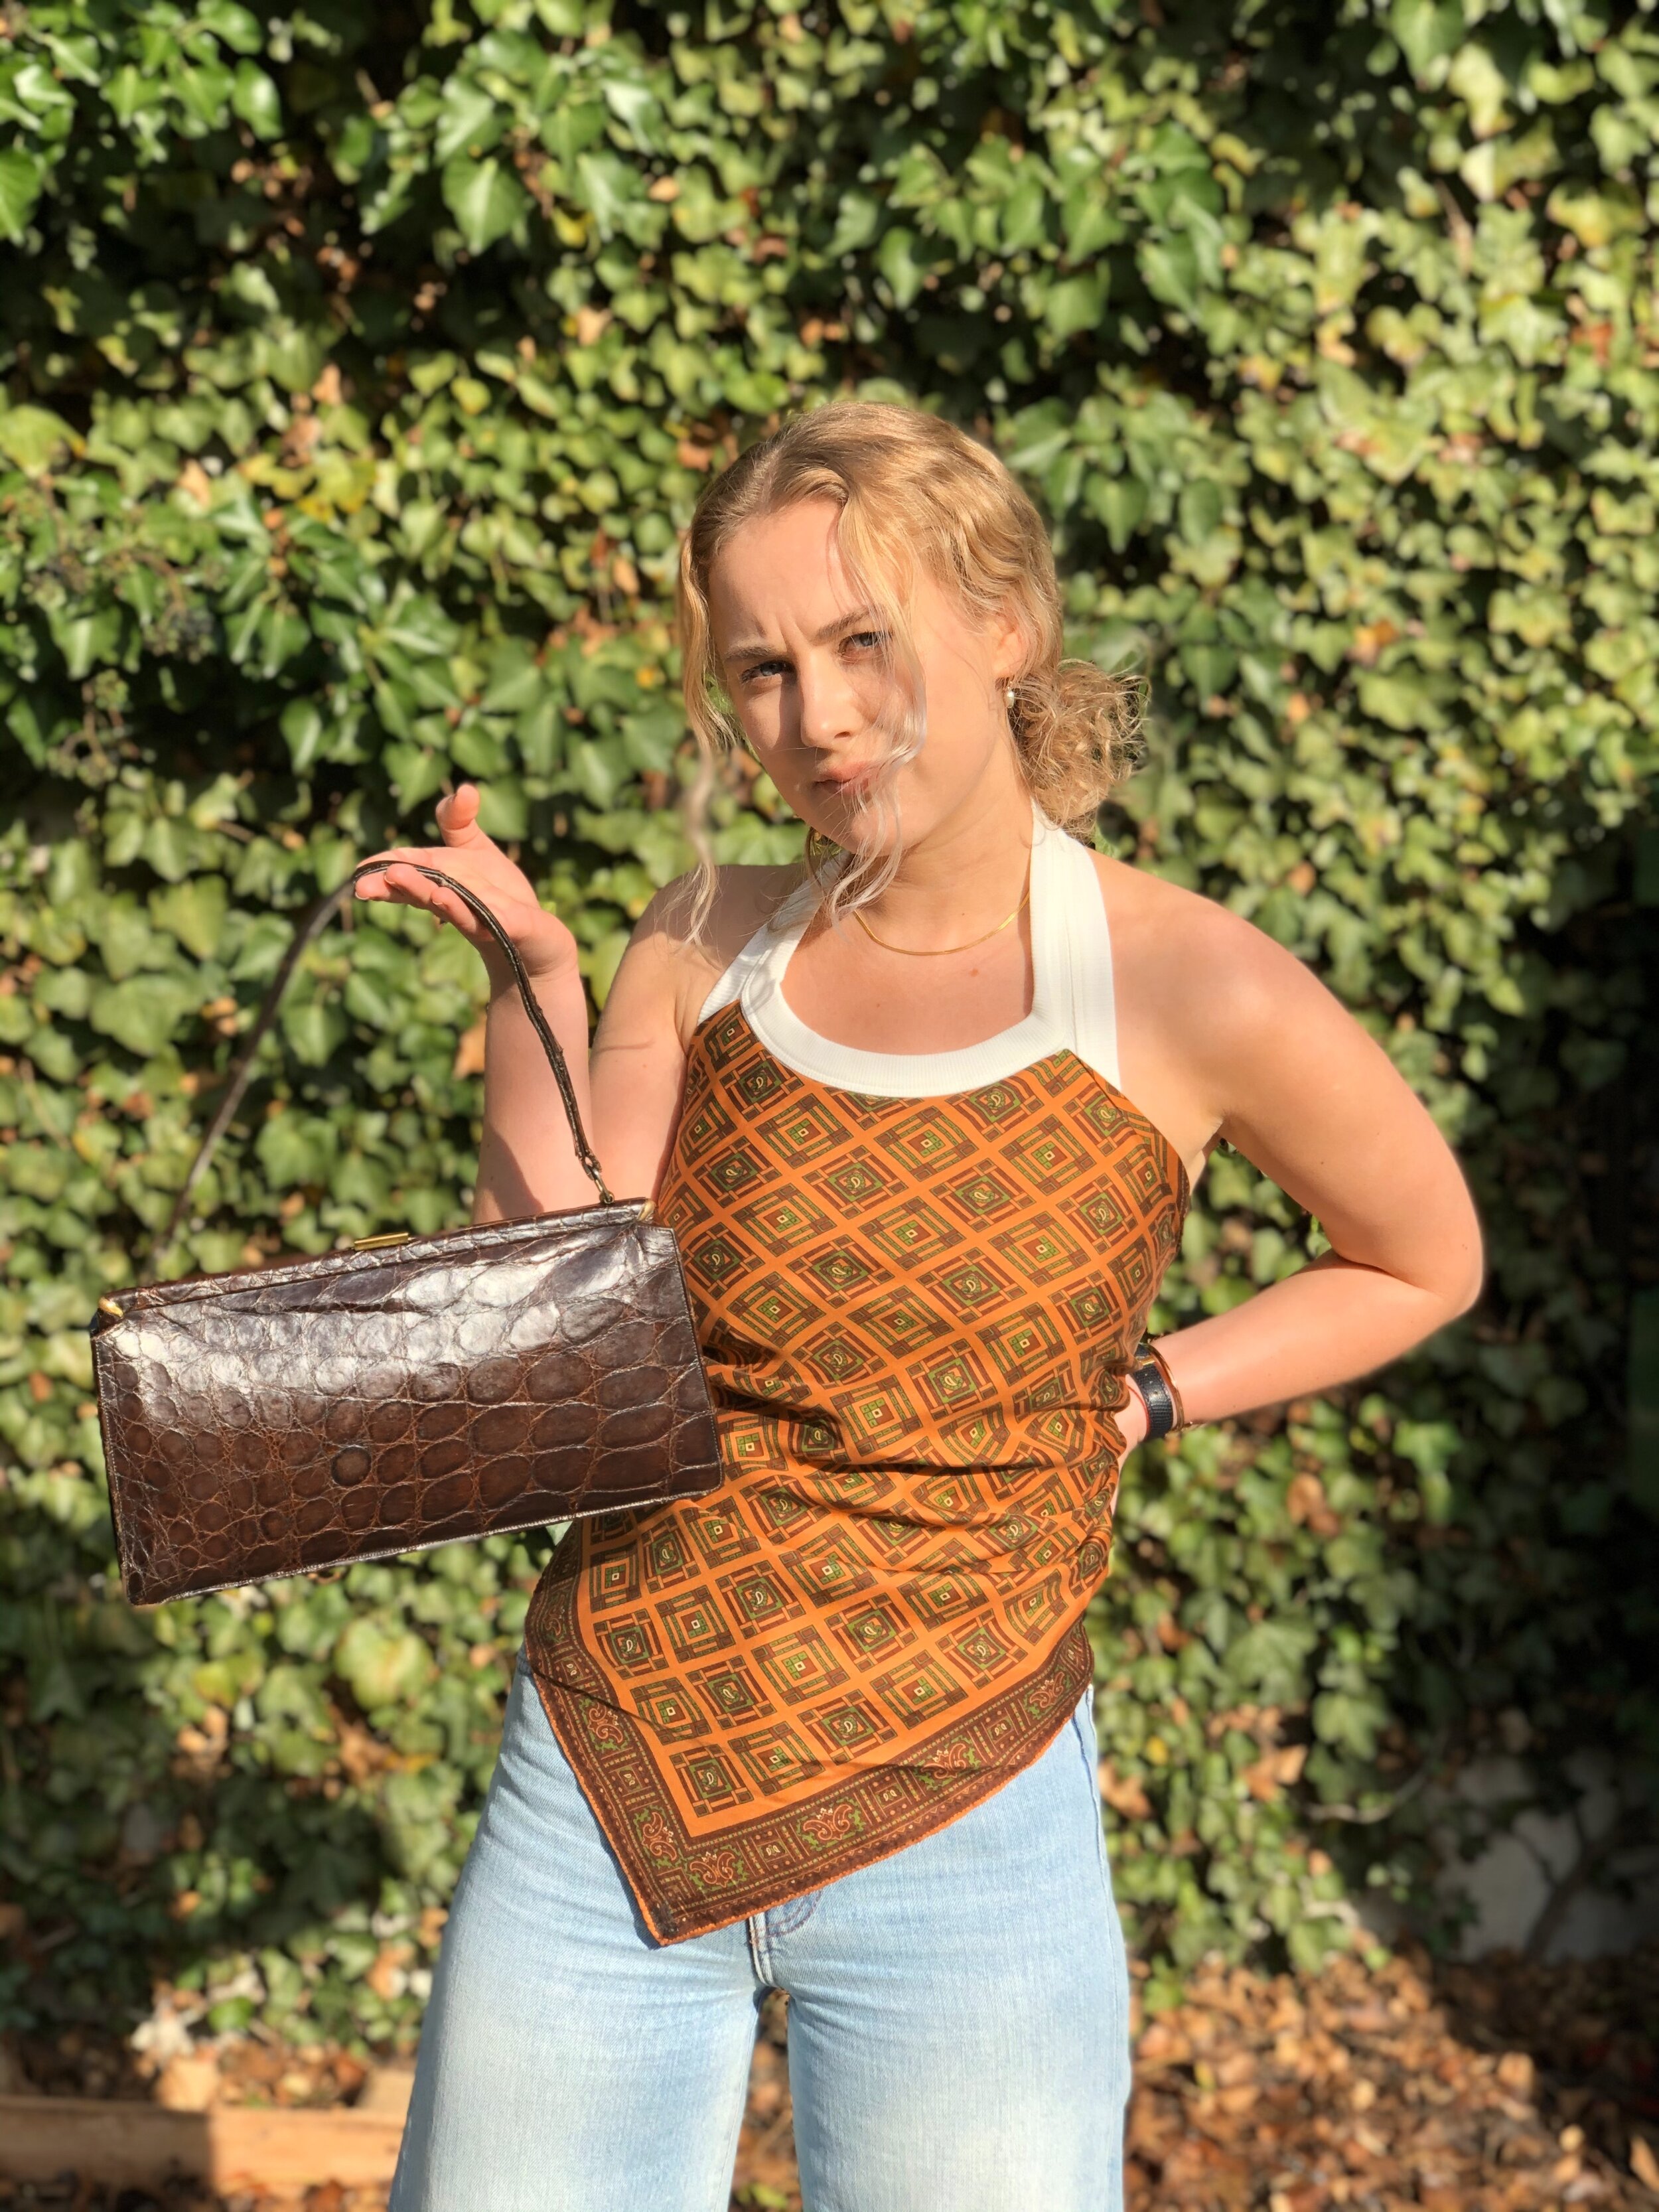  Erika Cavallini turned this exceedingly cool vintage scarf into a groovy top. We have 3 in store. Each is totally unique and all are dreamy.  Bonus item: This vintage bag - because these two pieces belong together. 